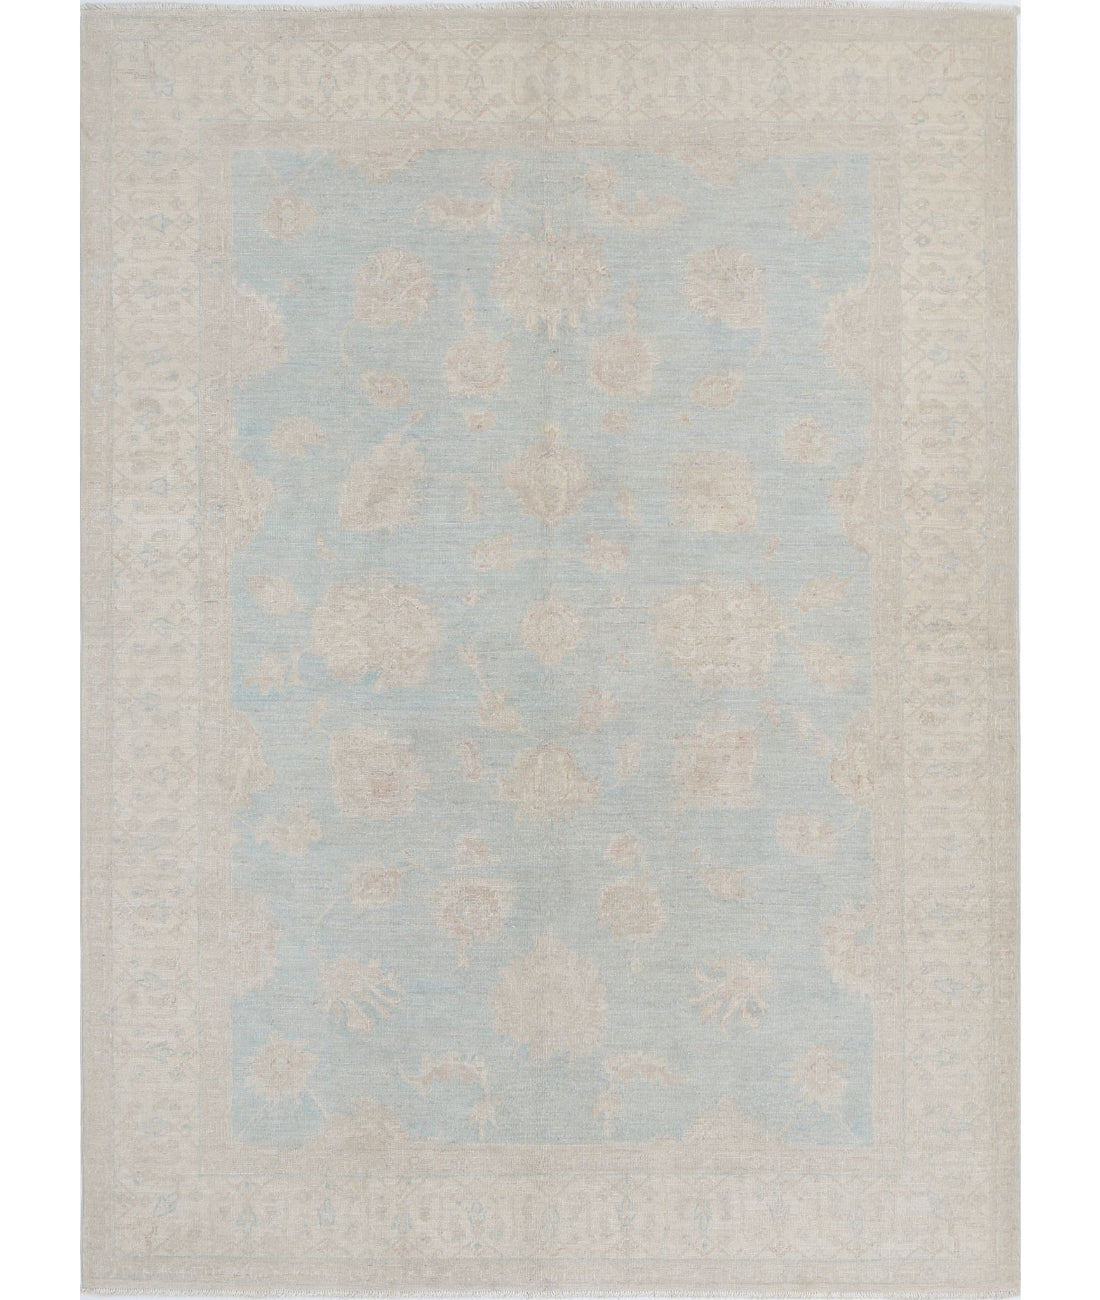 Hand Knotted Serenity Wool Rug - 5'6'' x 7'6'' 5'6'' x 7'6'' (165 X 225) / Blue / Ivory